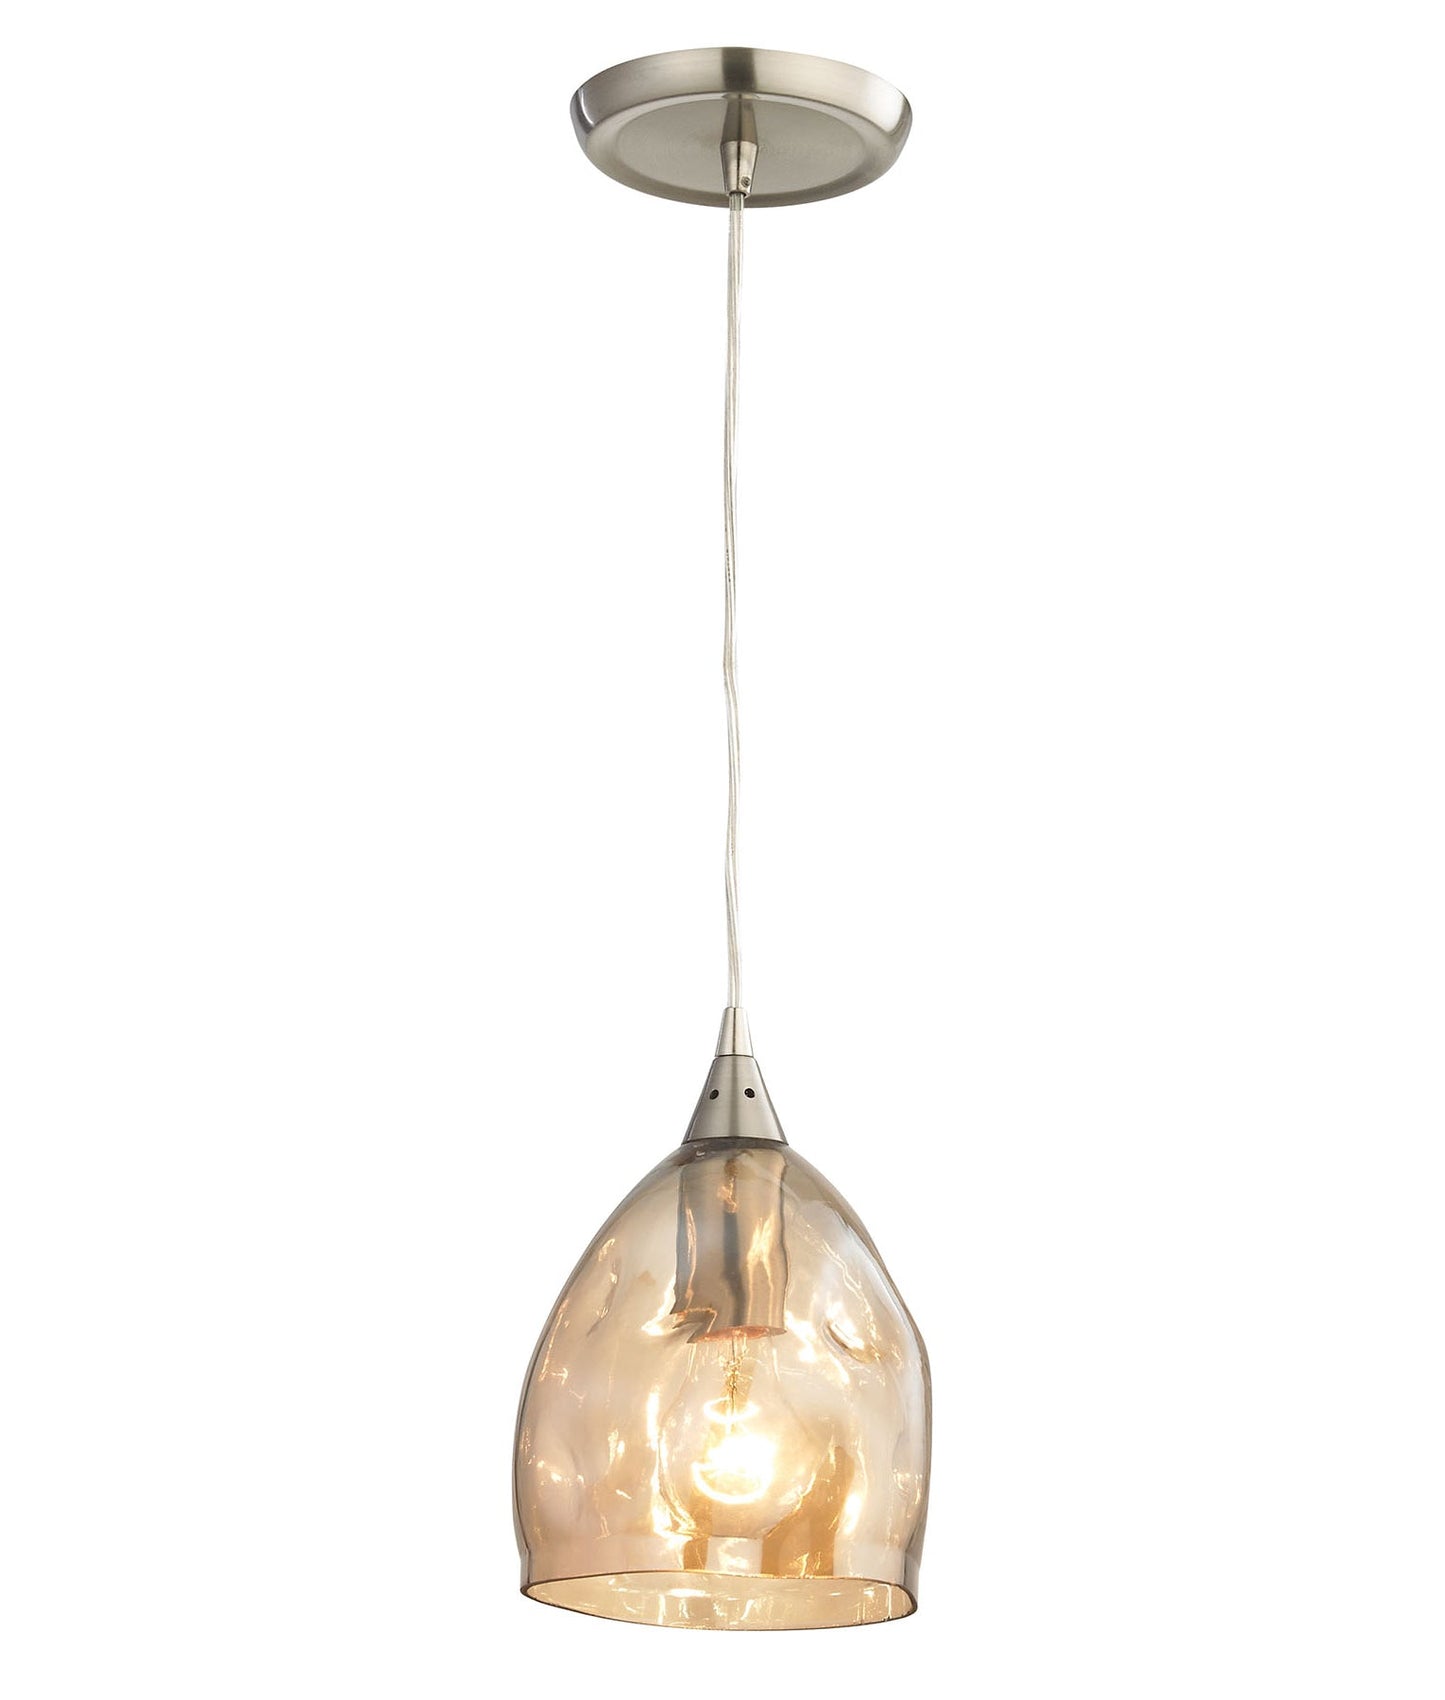 ORDITO: Abstract Chrome With Glass Ellipse Pendant Lights